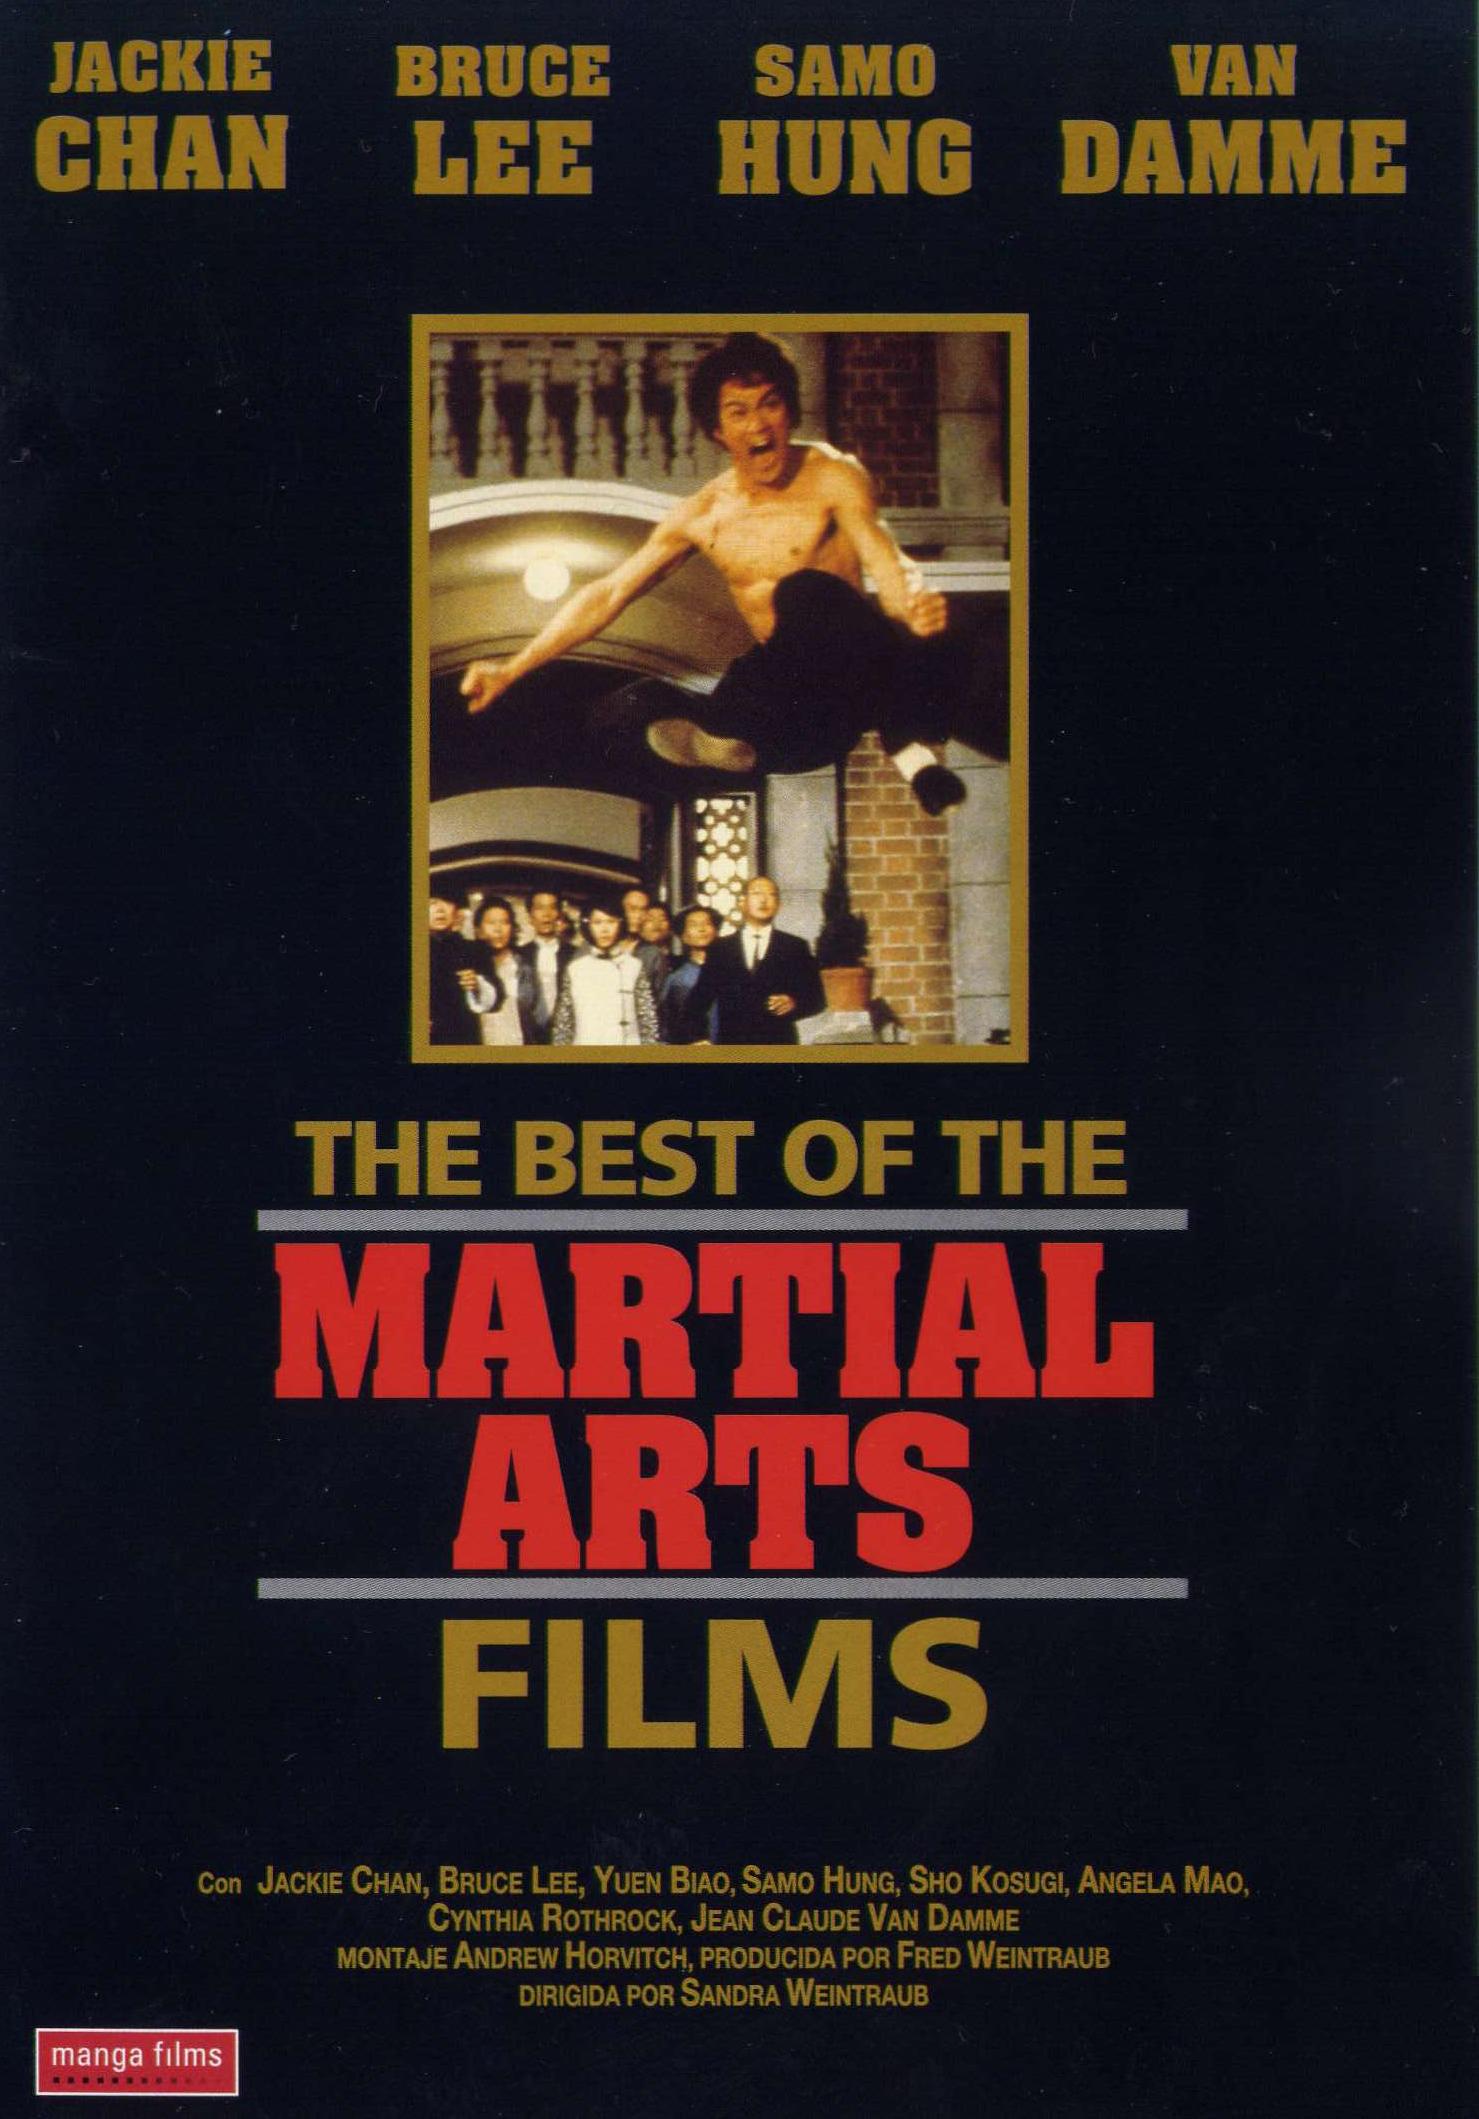 The Best of the Martial Arts Films (1990) Screenshot 4 